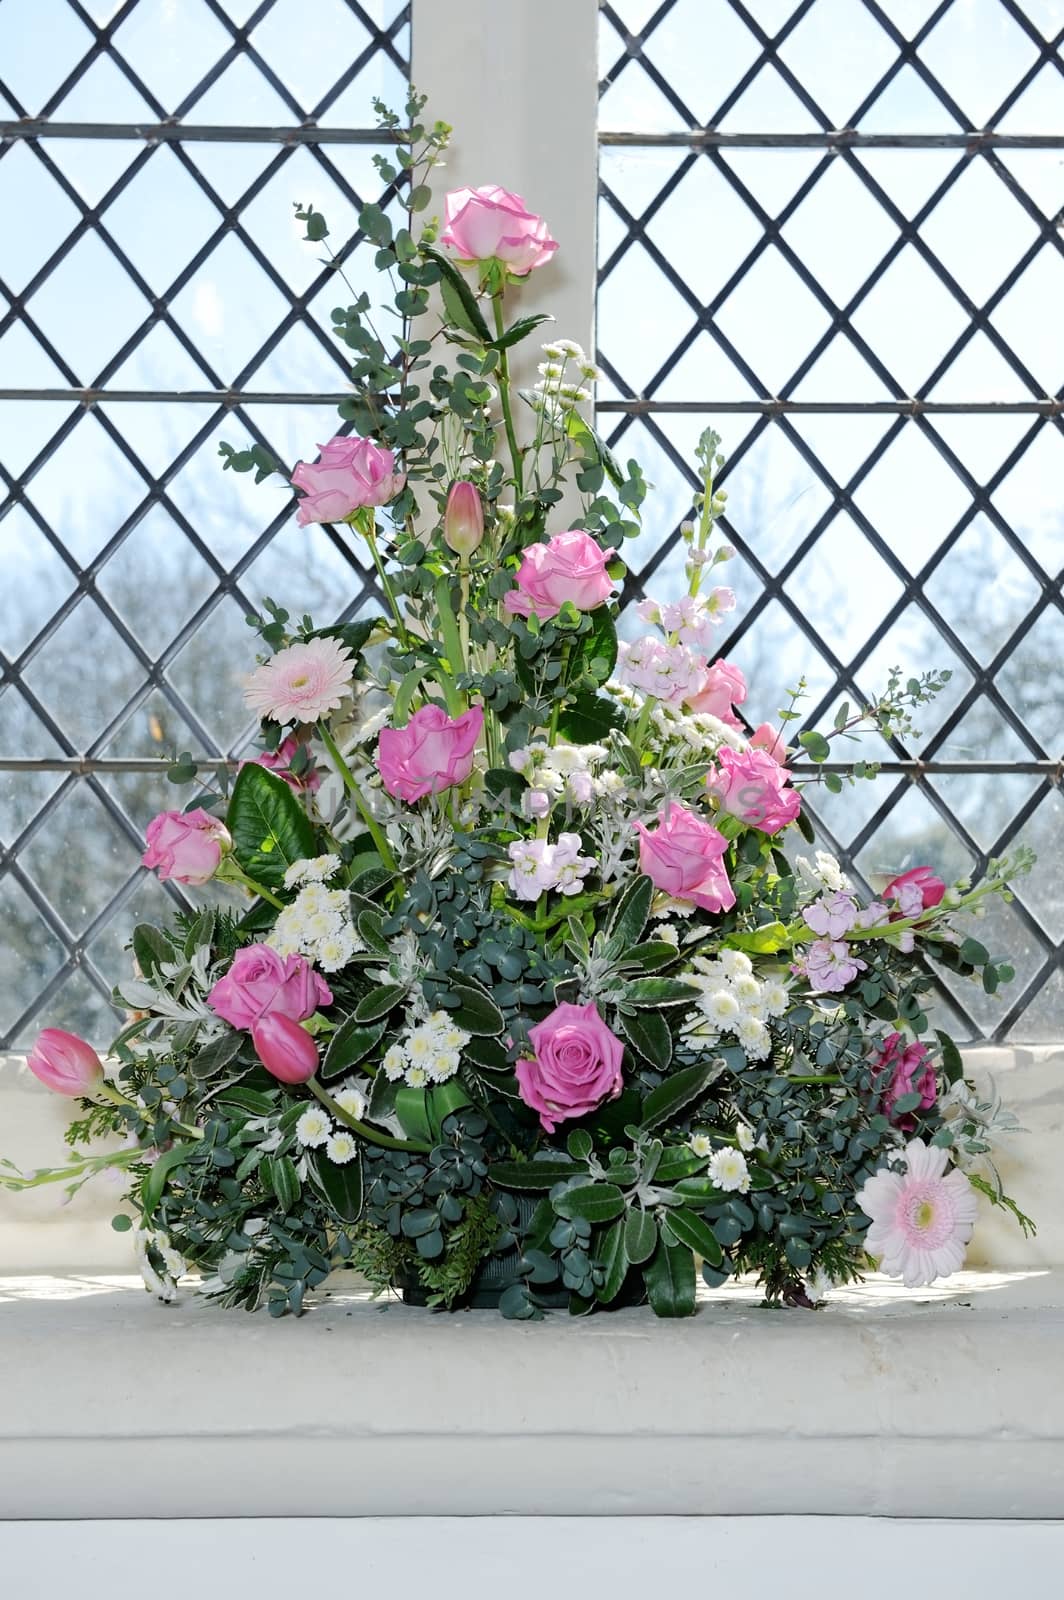 Flower arrangement on wedding day in church with pink roses